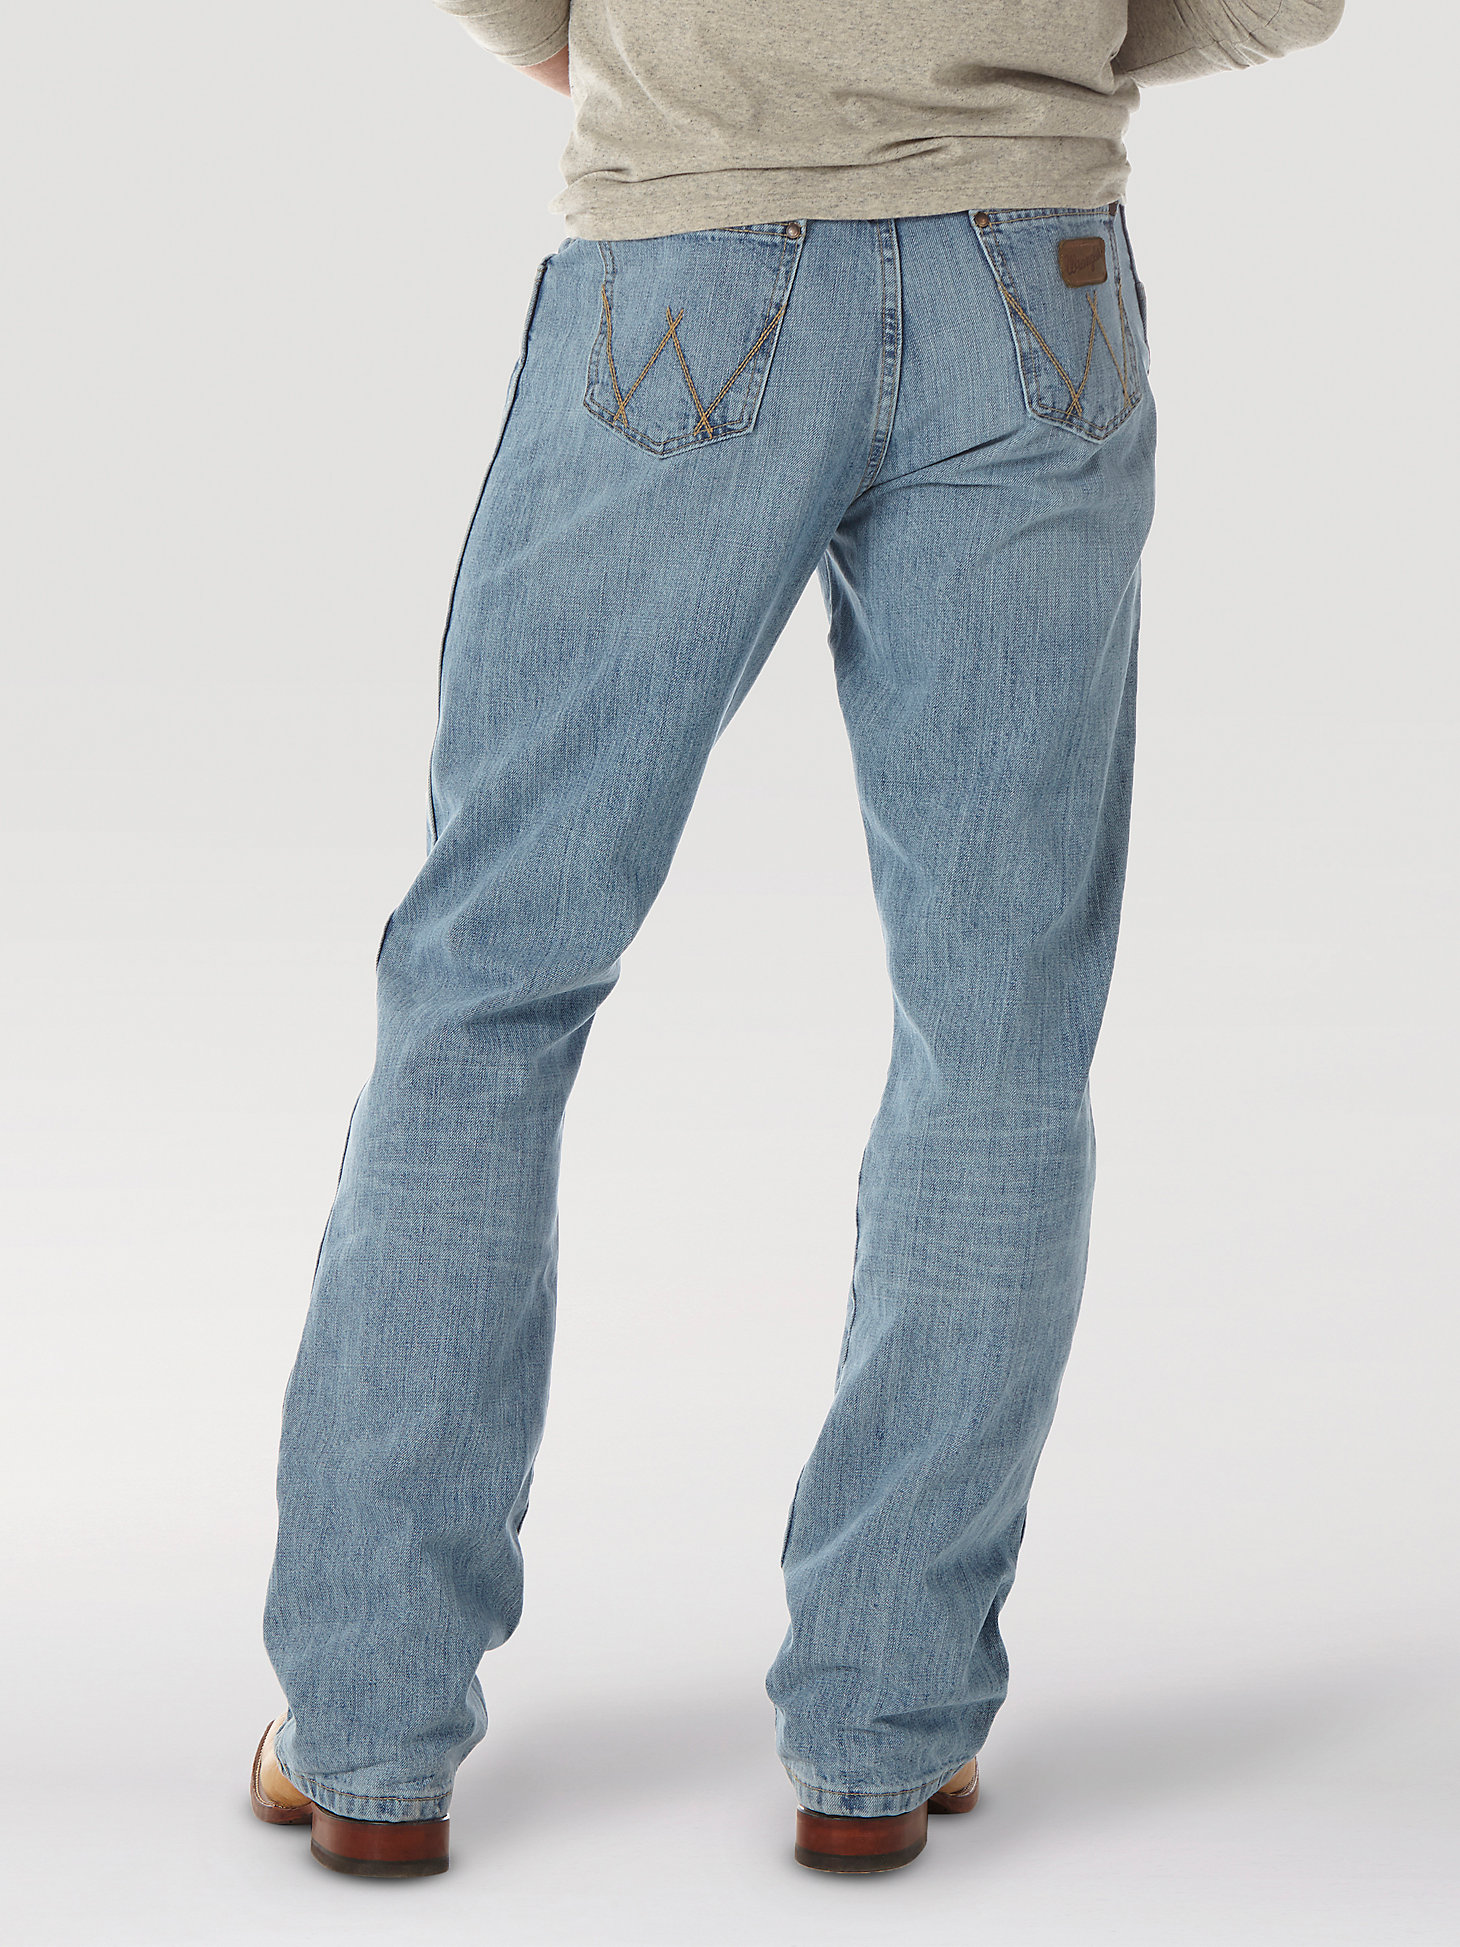 Men's Wrangler Retro® Relaxed Fit Bootcut Jean in Crest alternative view 2